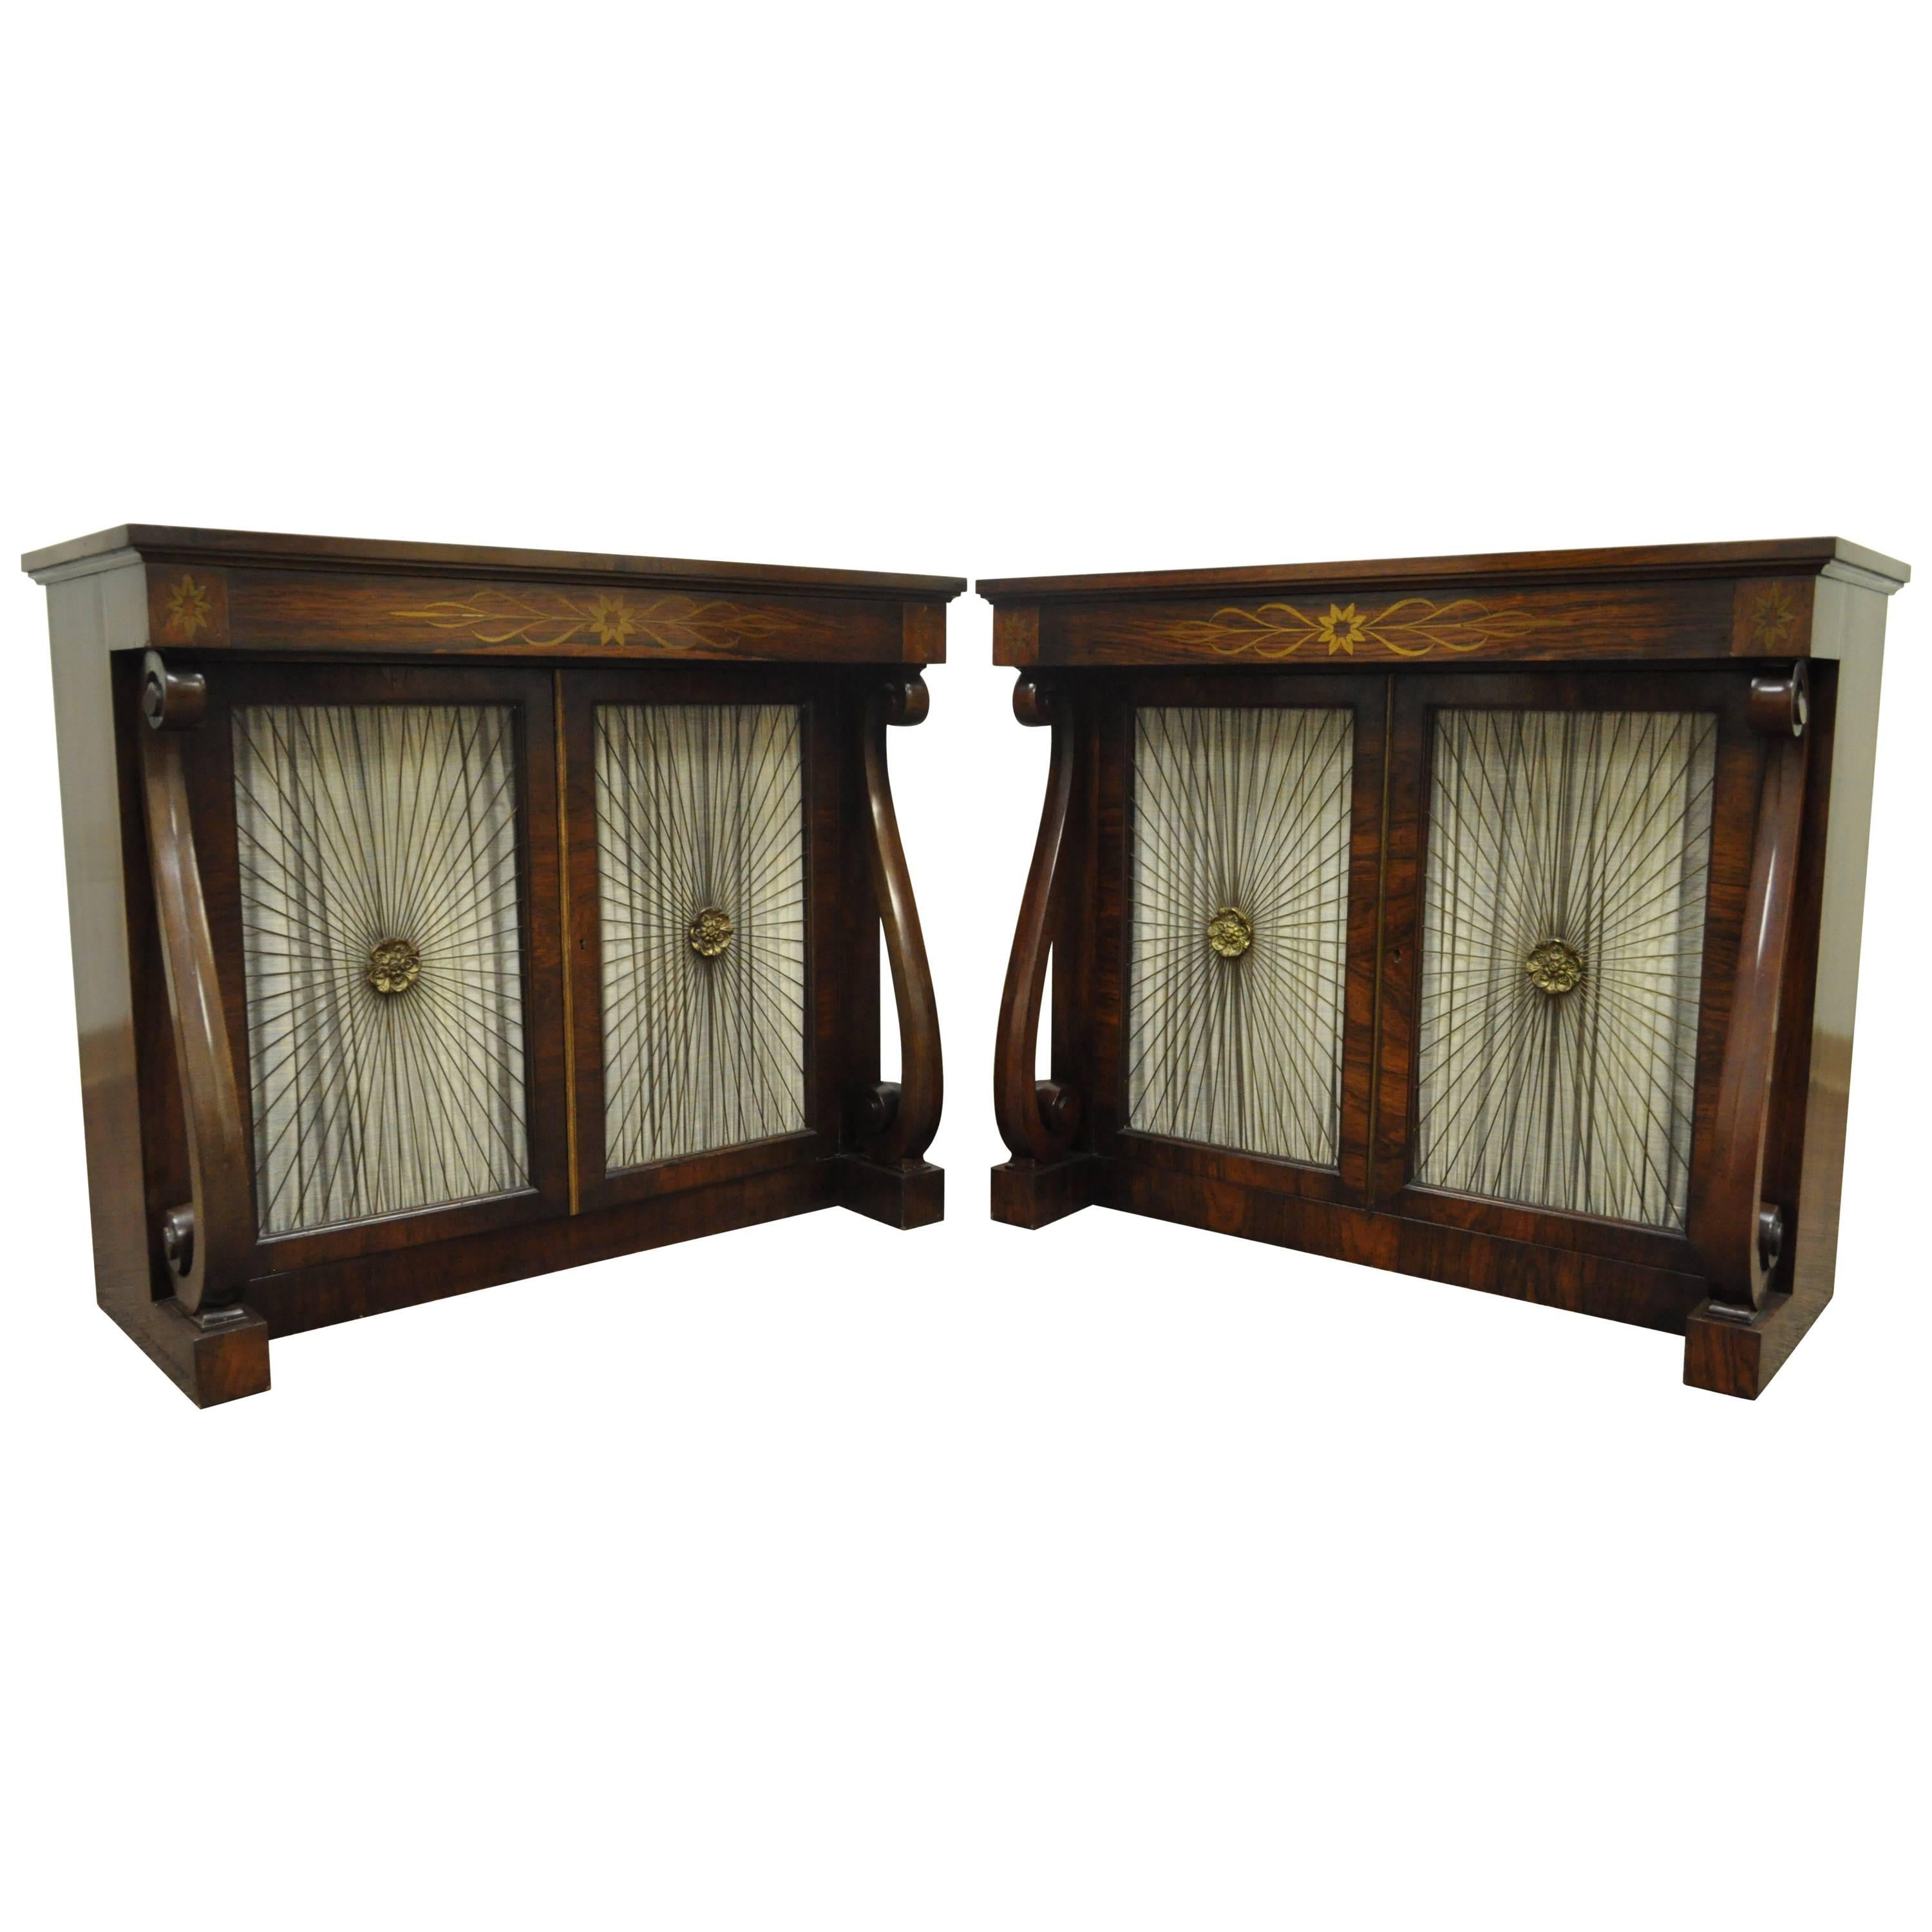 Pair of Daniel Jones Rosewood & Brass Regency Neoclassical Style Console Tables